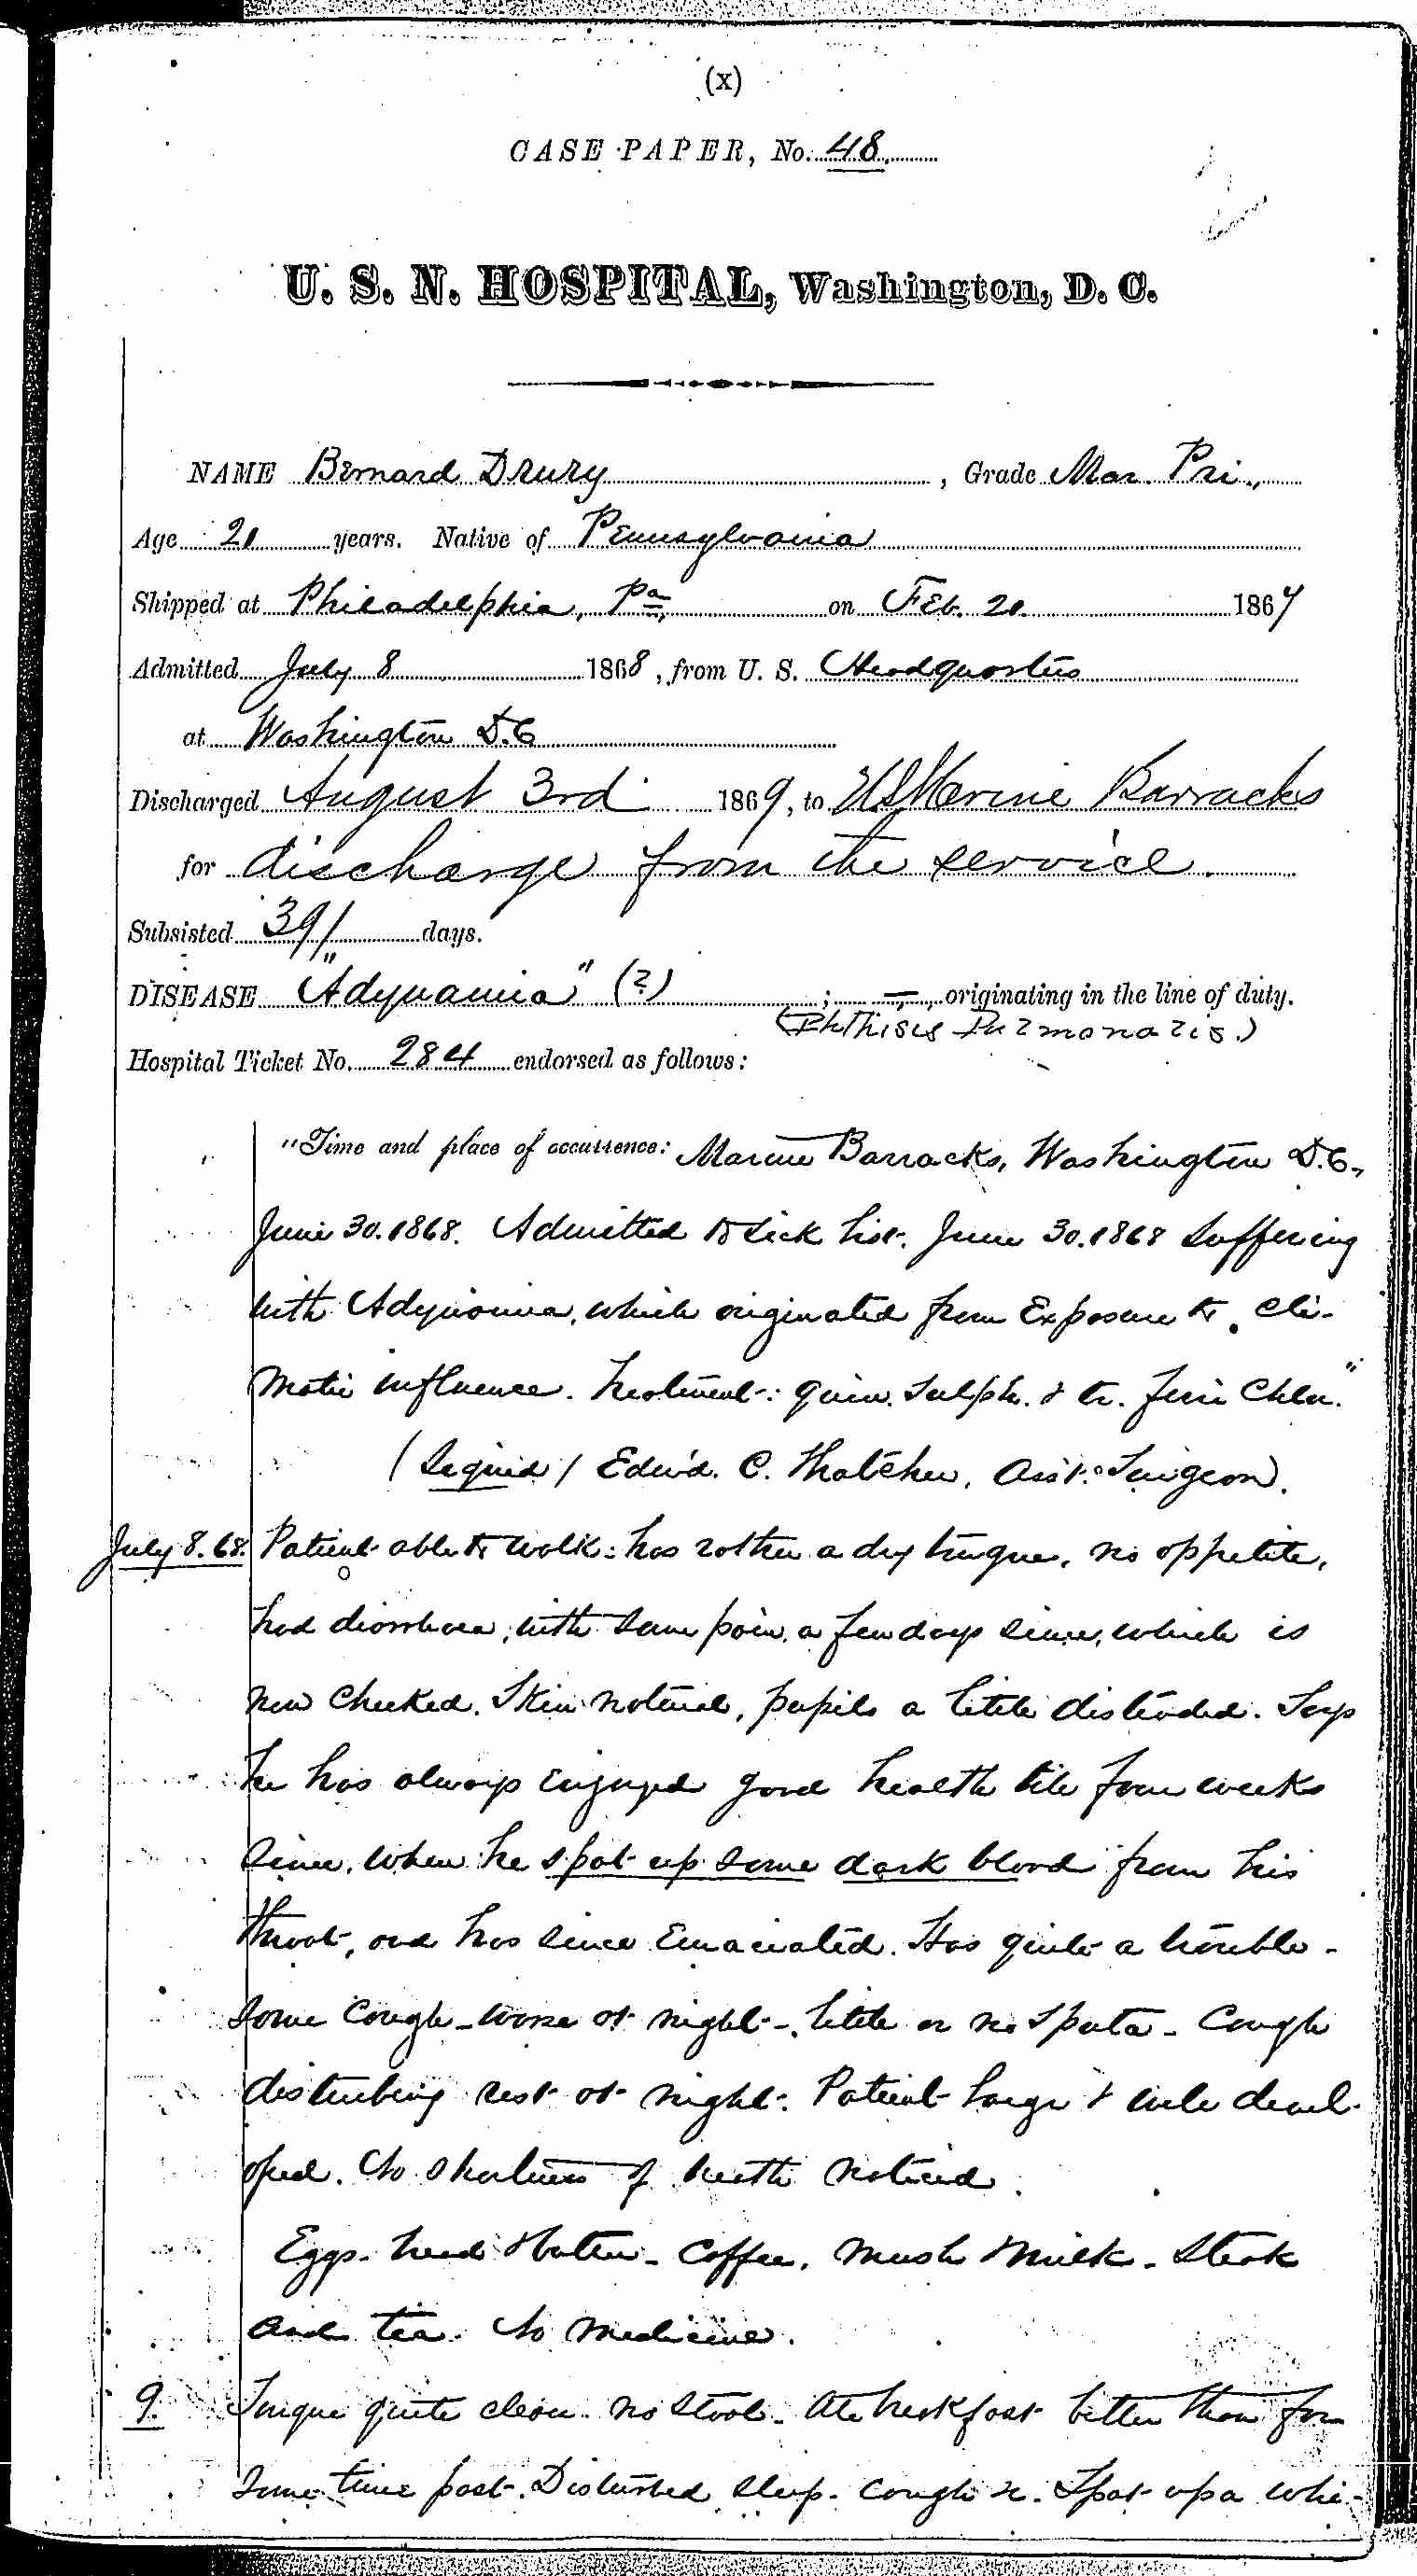 Entry for Bernard Drury (page 1 of 31) in the log Hospital Tickets and Case Papers - Naval Hospital - Washington, D.C. - 1868-69